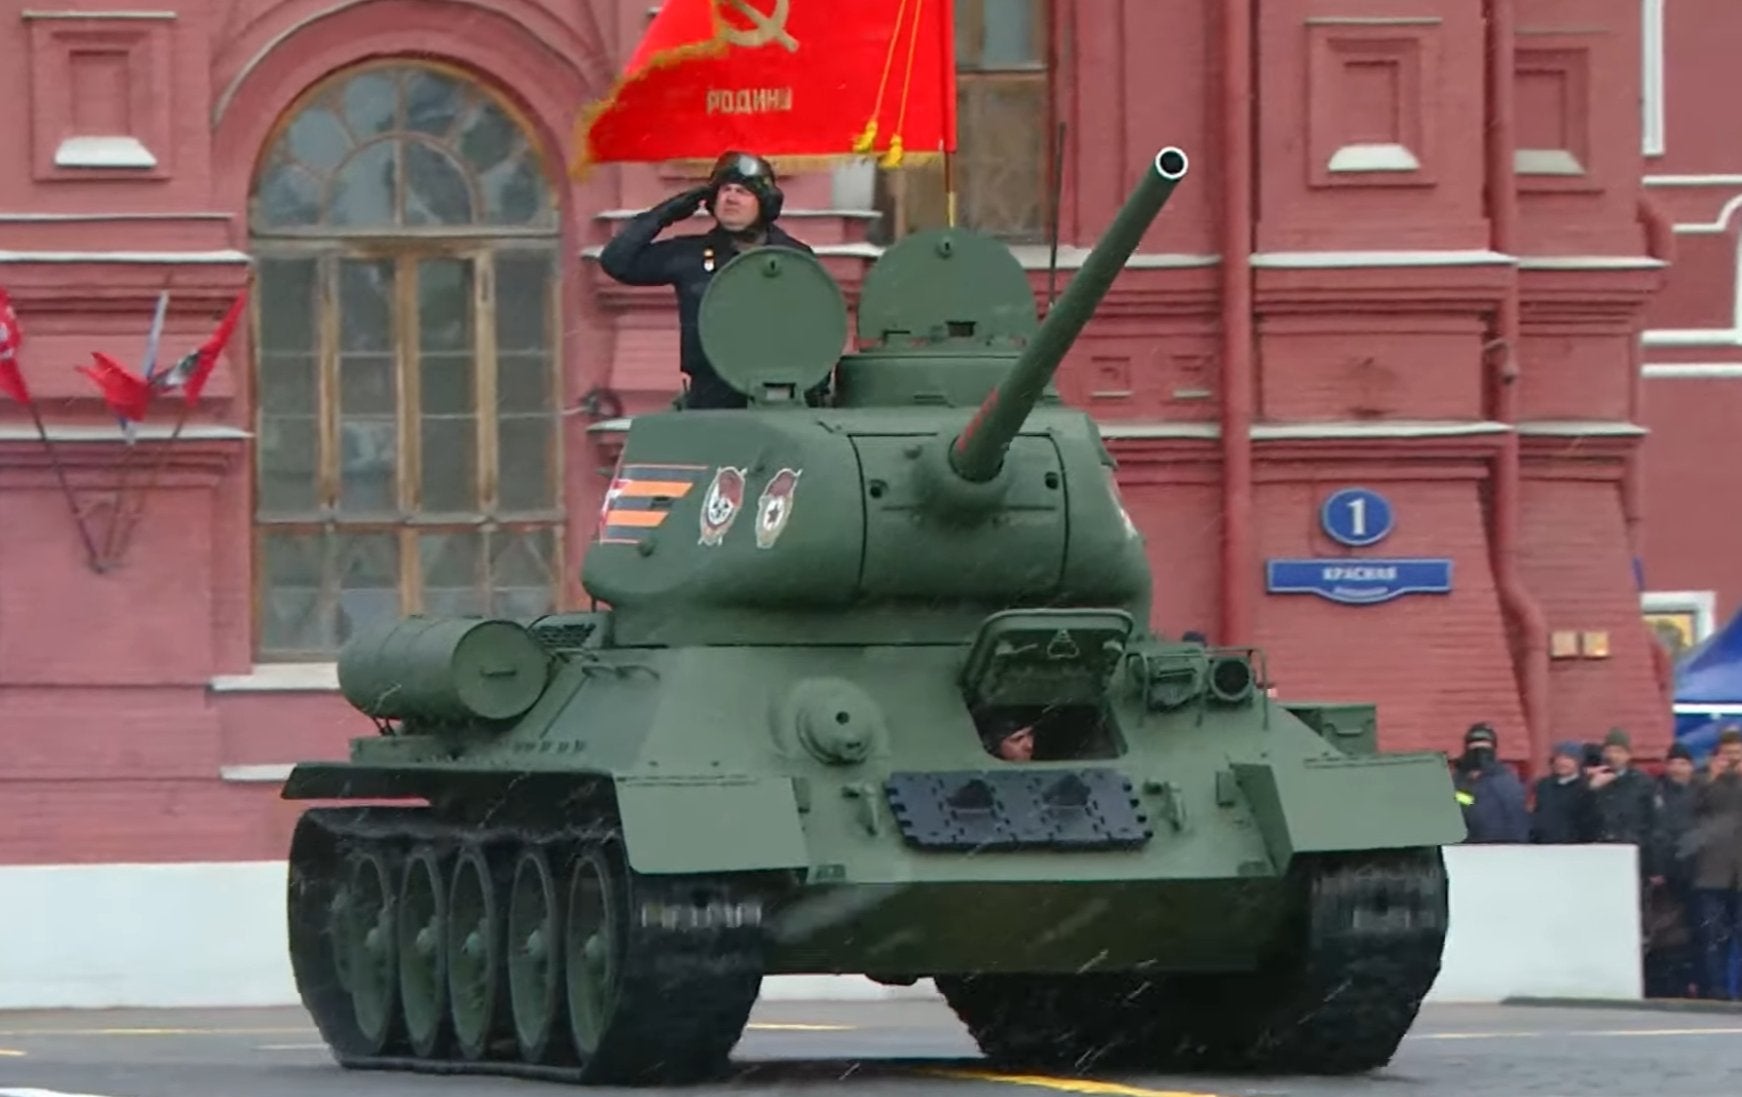 Only one tank was seen parading in Russia’s annual Victory Day celebrations